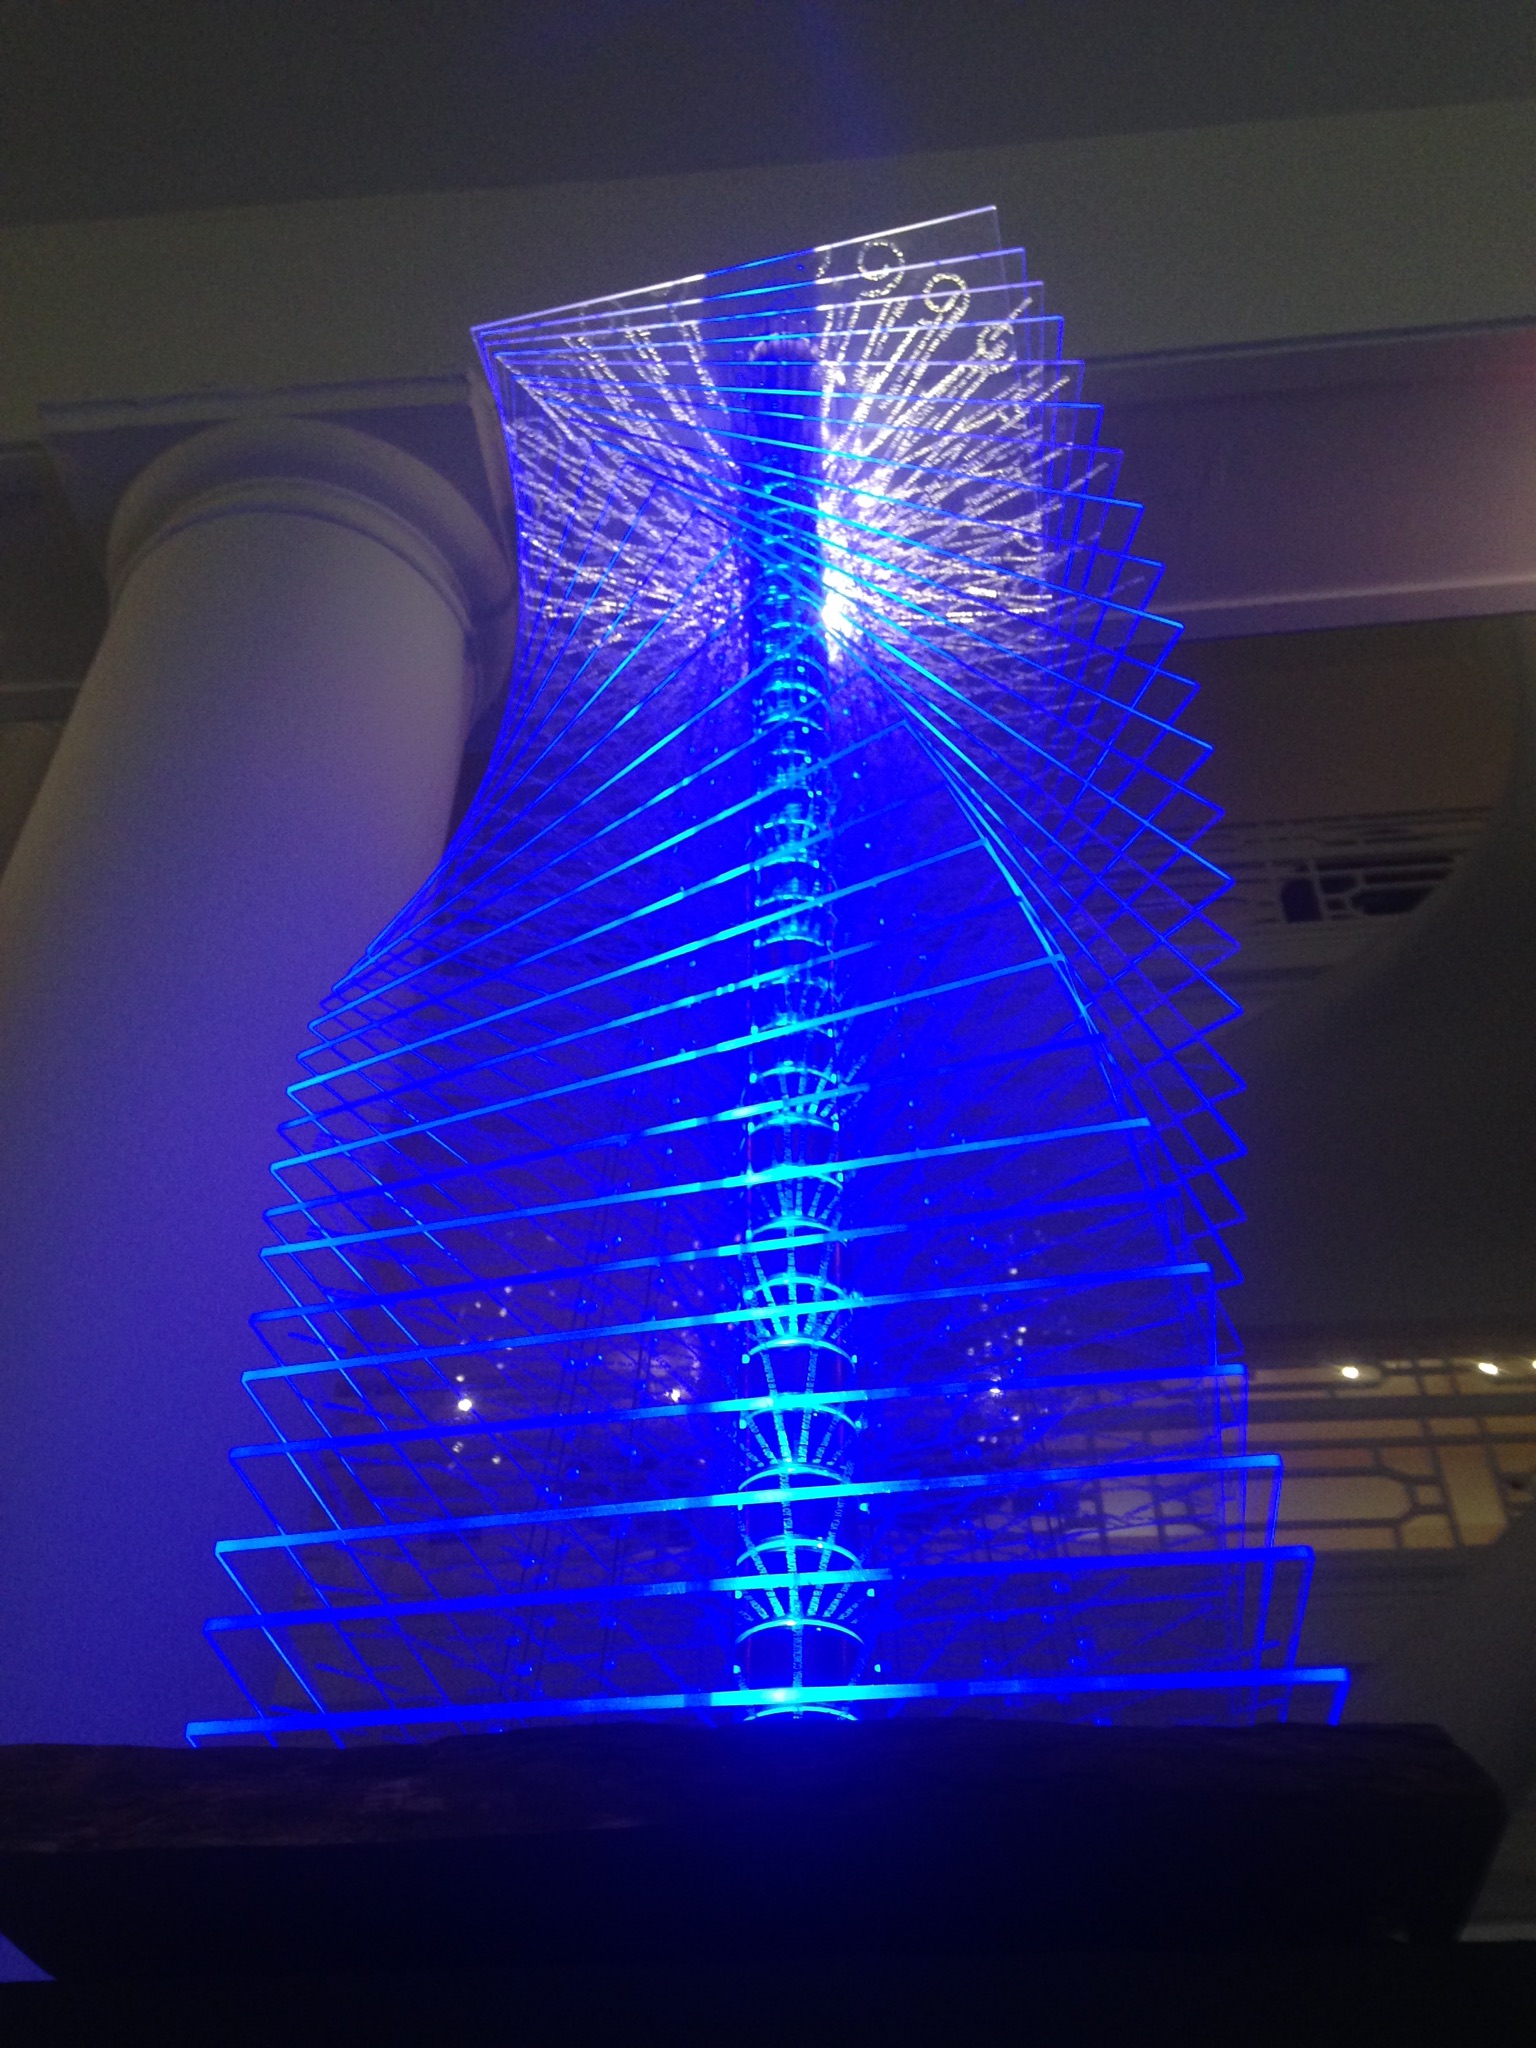 art exhibit piece with overlapping acrylic panels lit up by a blue LED light.